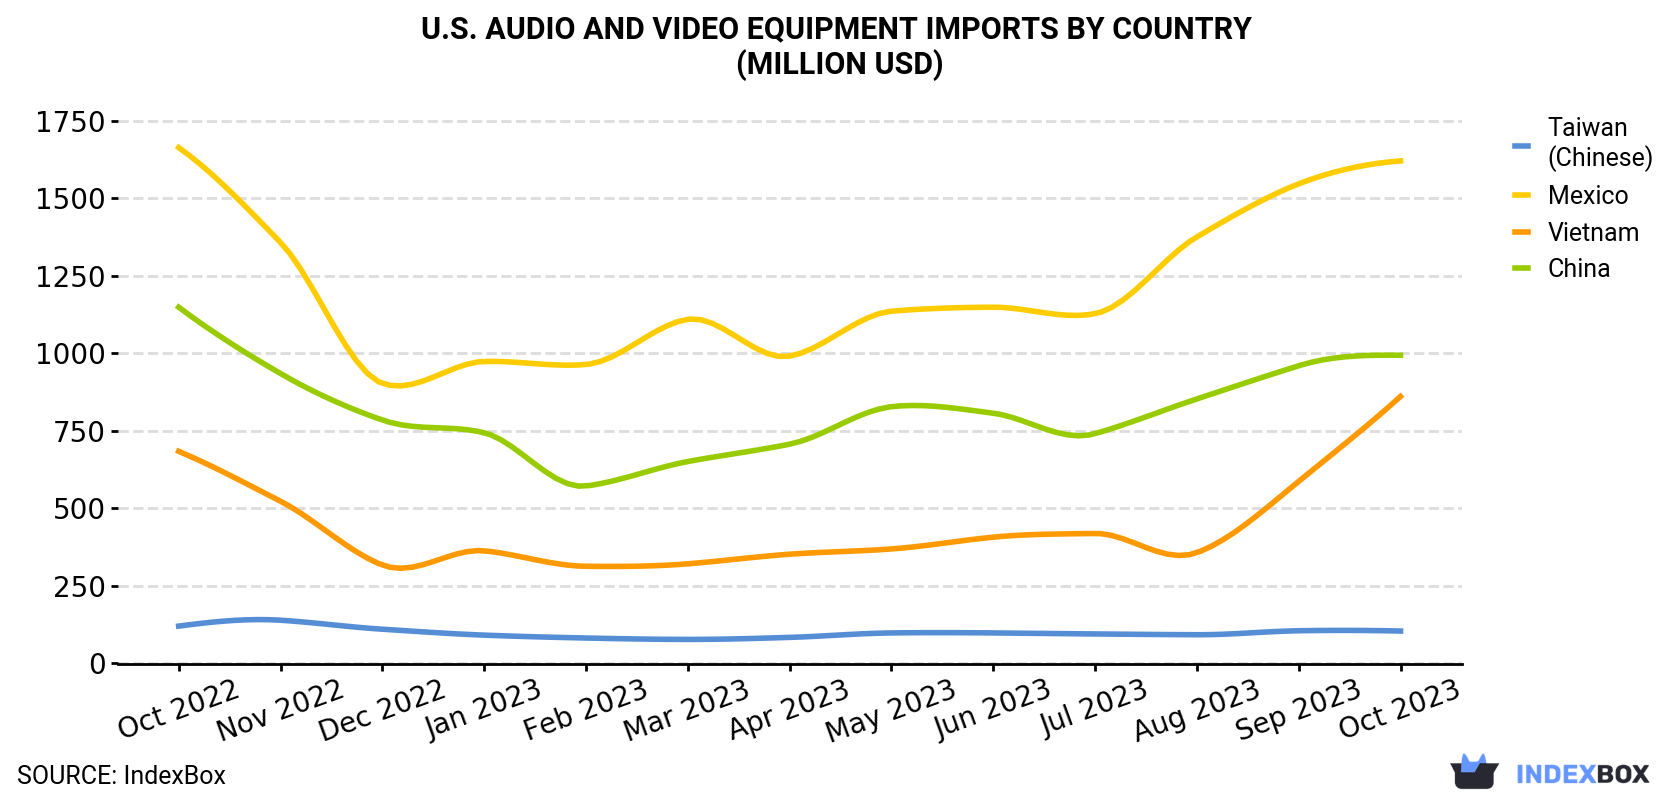 U.S. Audio And Video Equipment Imports By Country (Million USD)